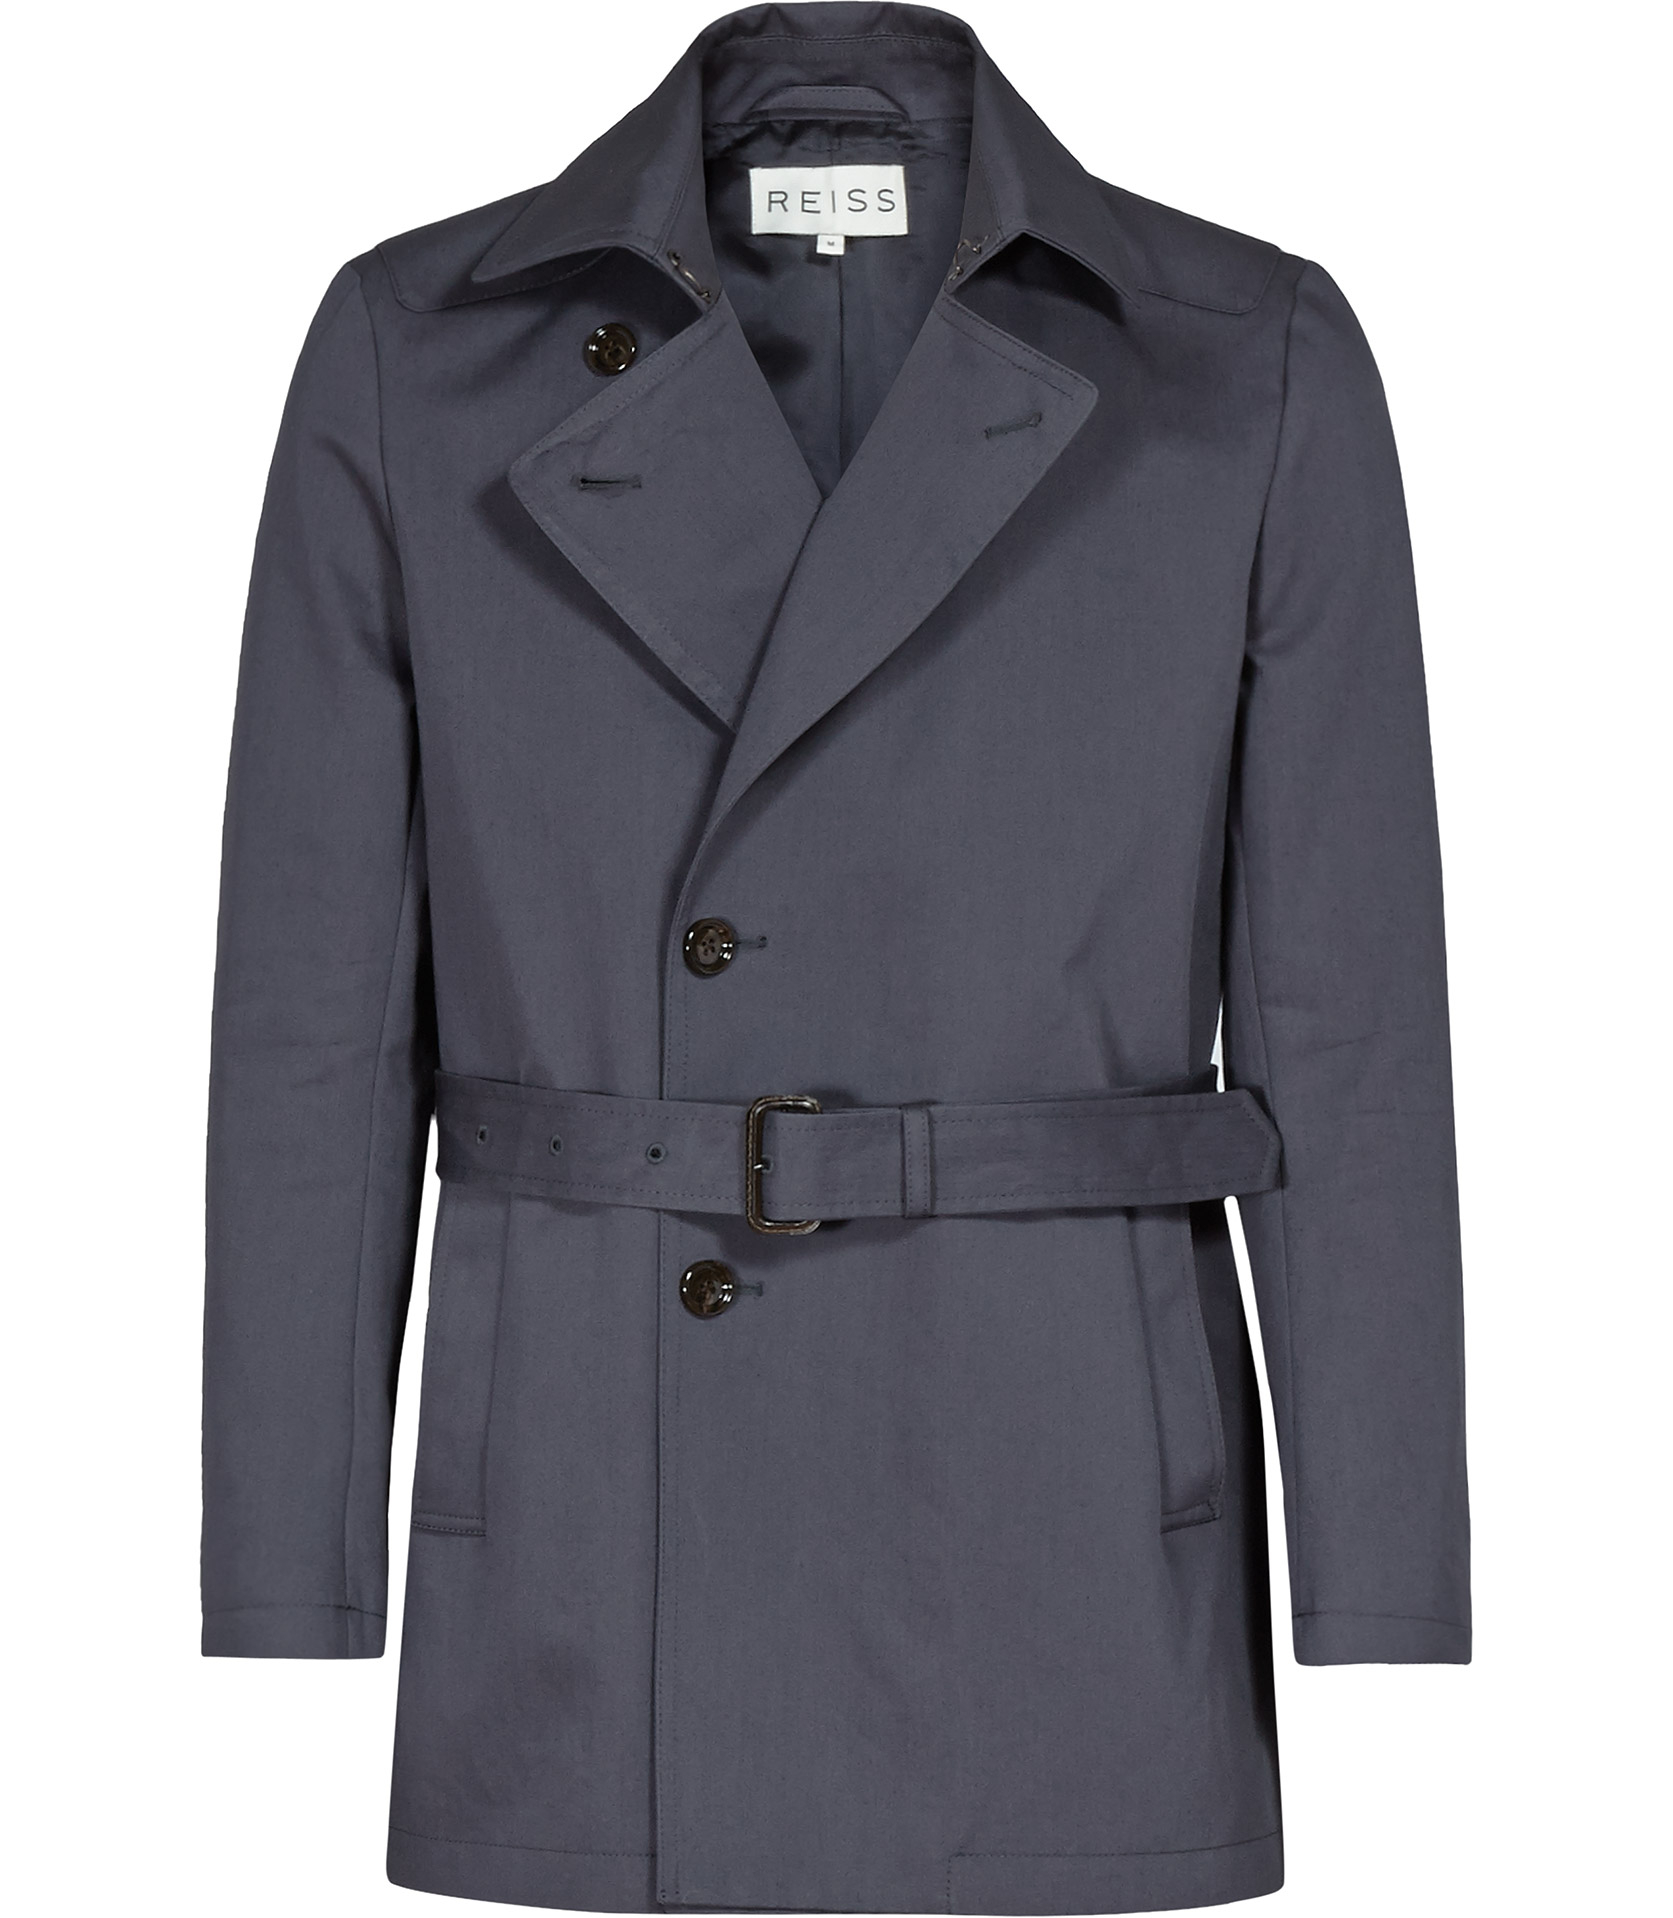 Lyst - Reiss Sphere Belted Trench Coat in Blue for Men